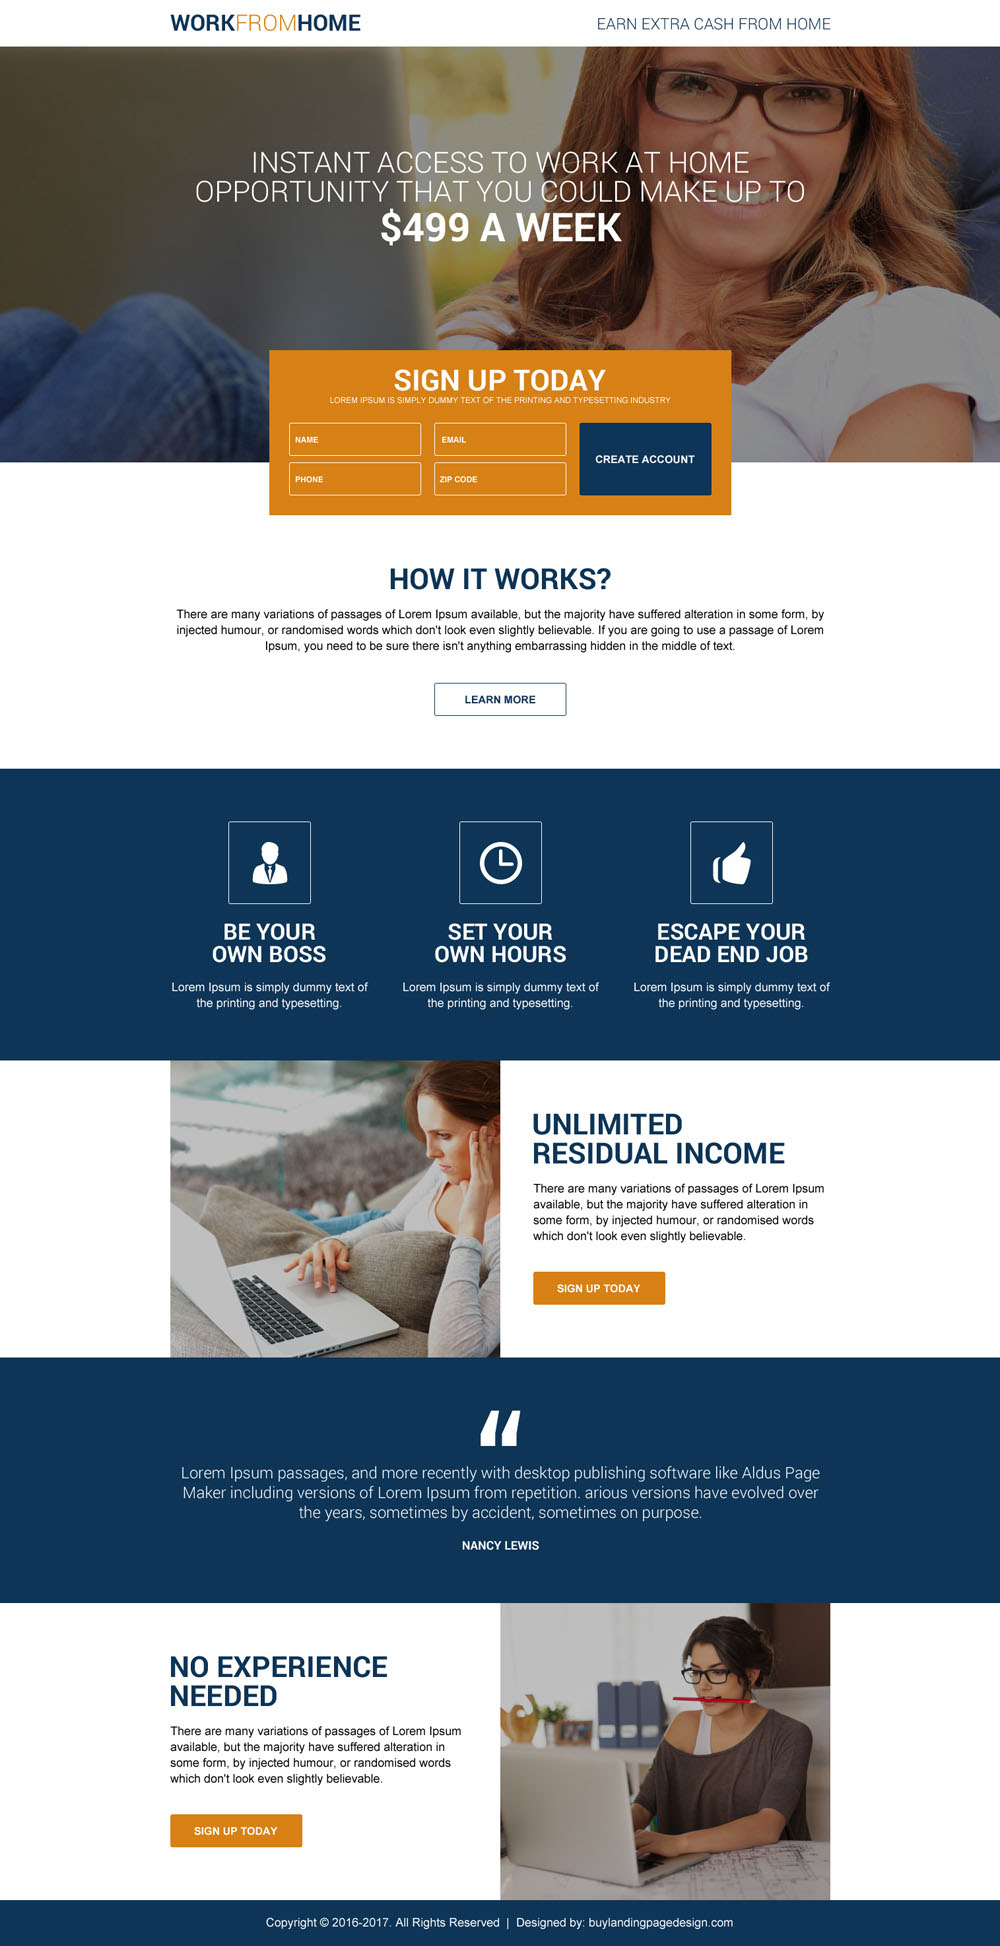 full-time-work-from-home-job-sign-up-lead-capture-landing-page-design-029